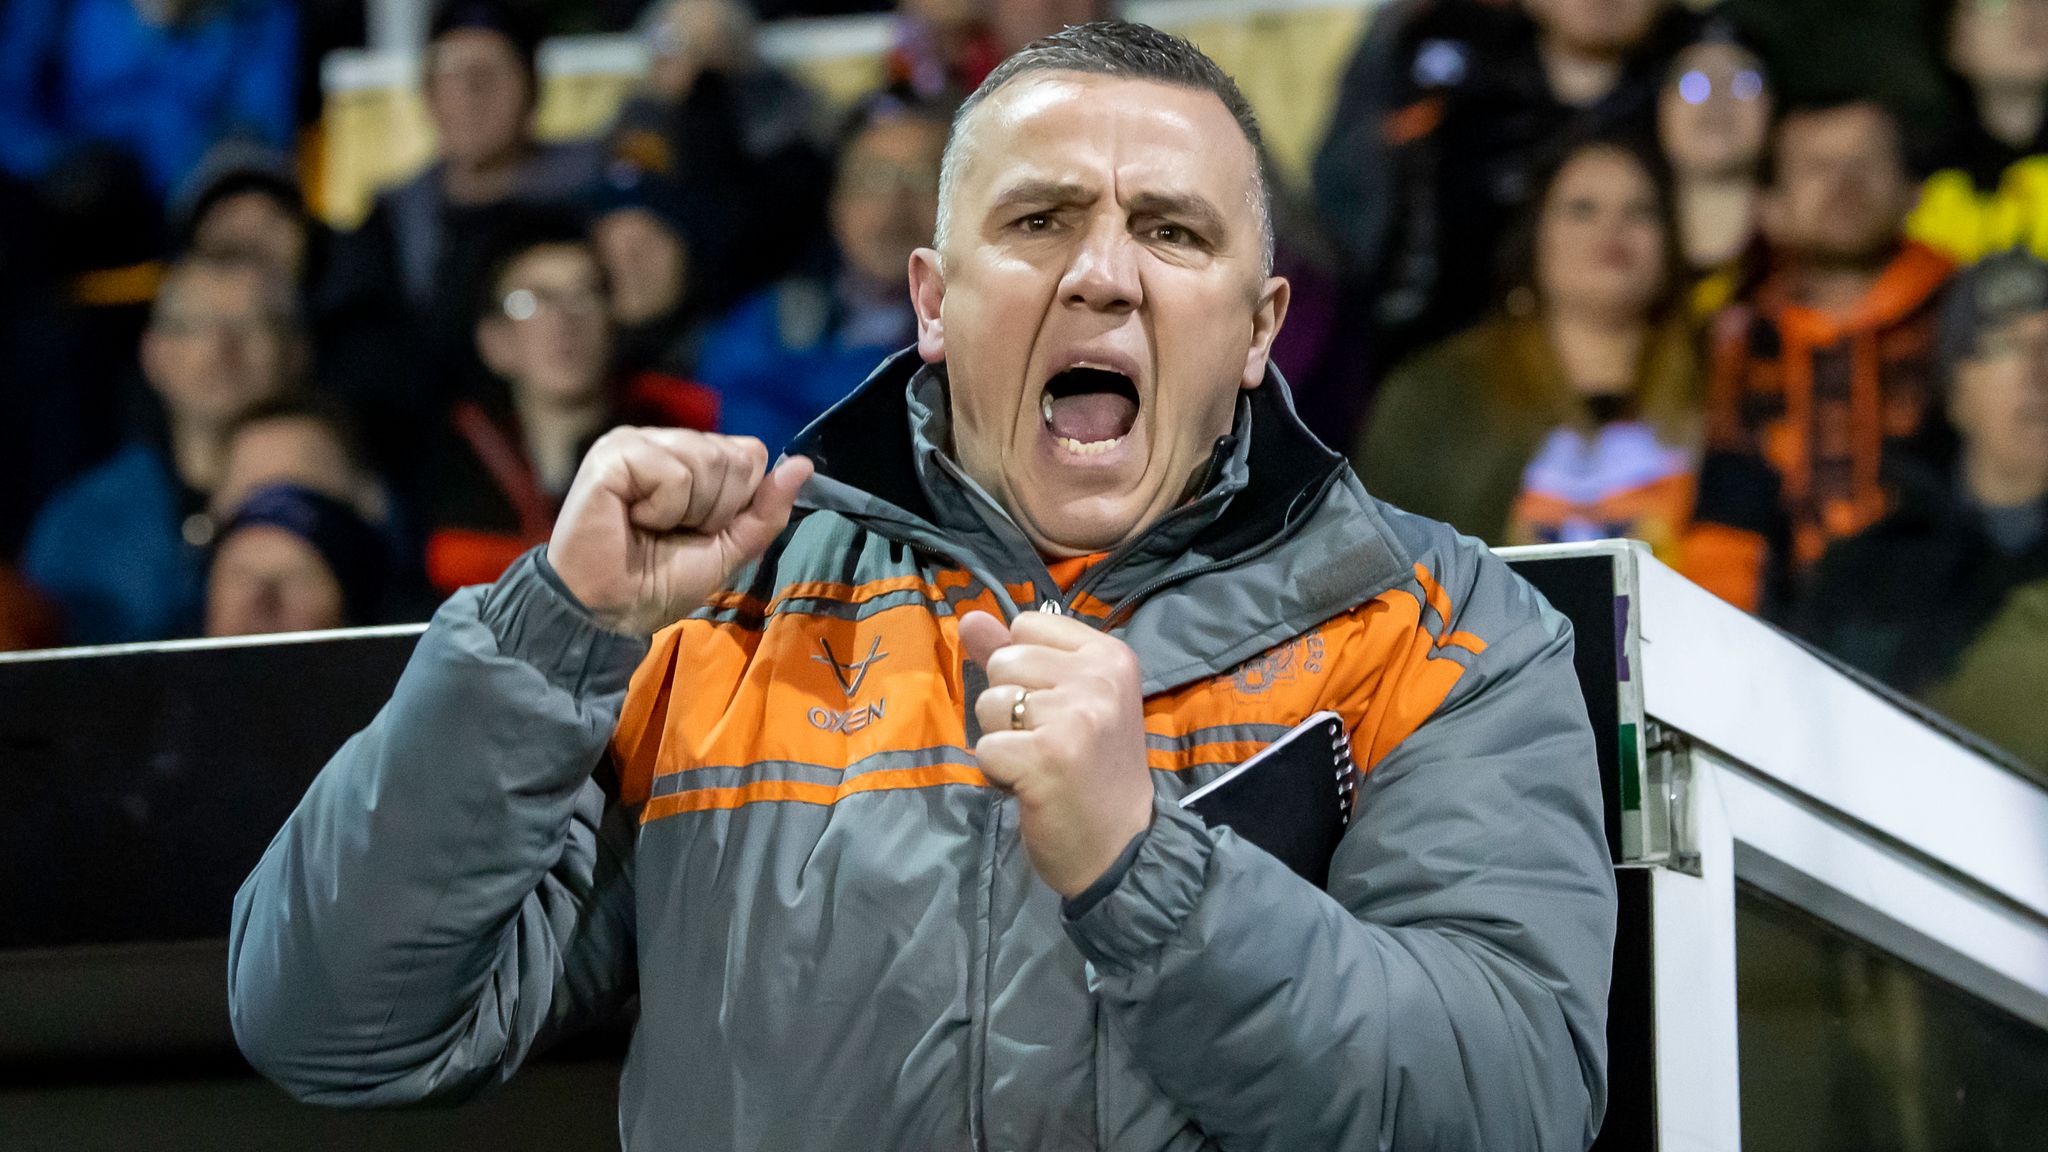 Castleford coach Andy Last sacked after heavy home defeat to Huddersfield